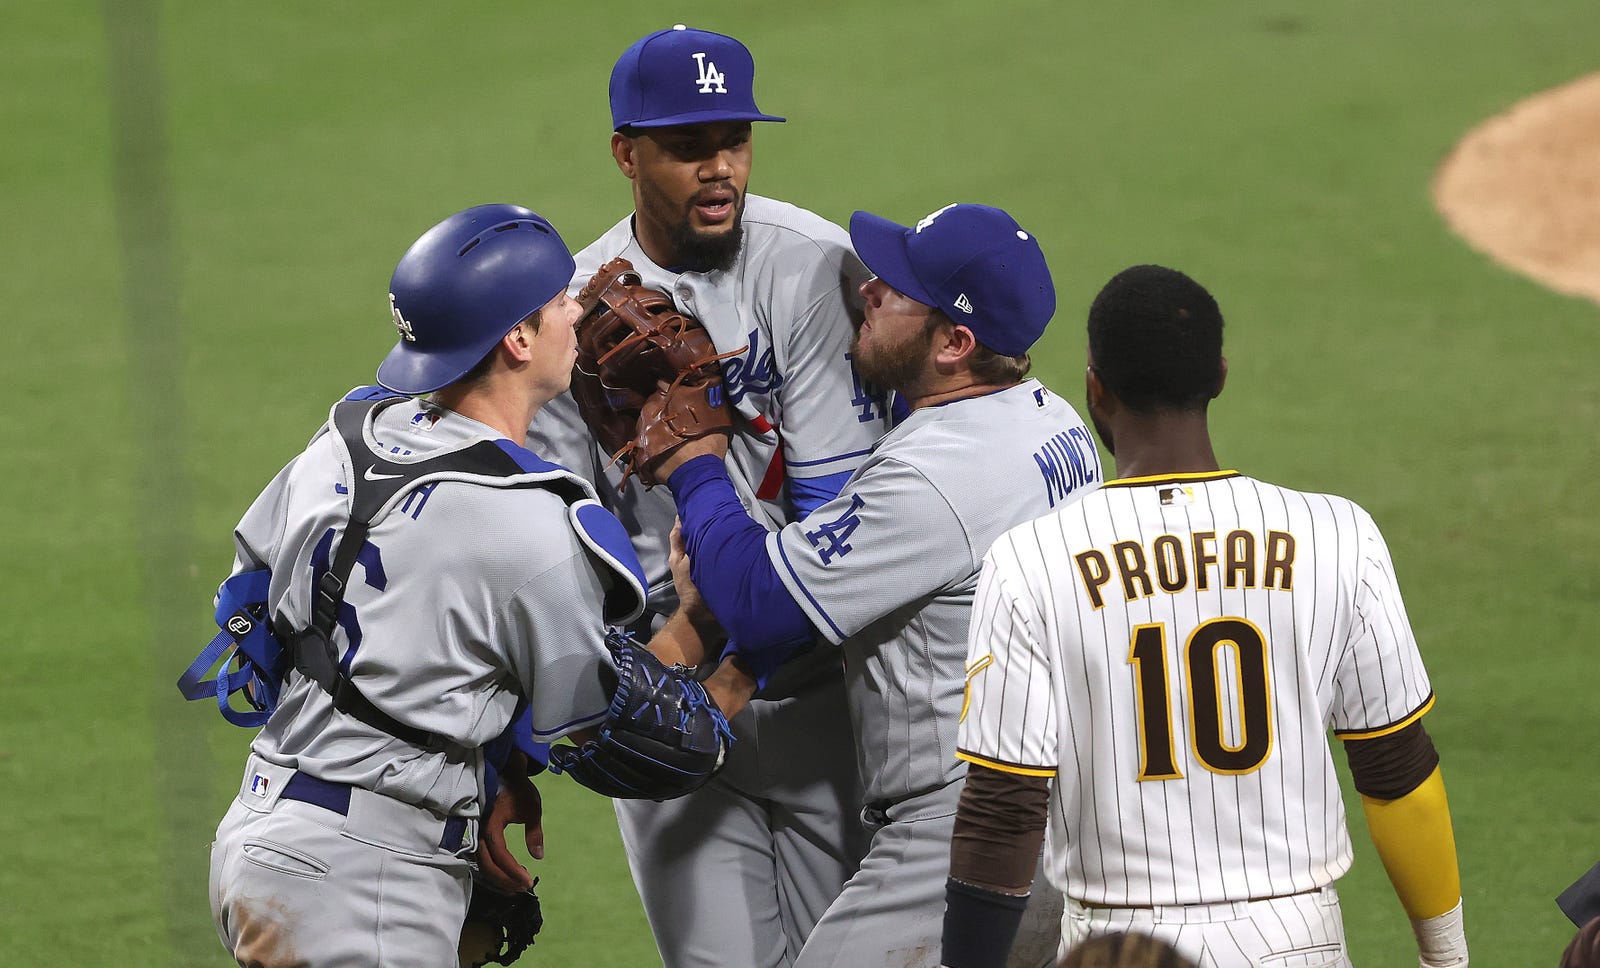 Los Angeles Dodgers a unanimous No. 1 in USA TODAY MLB Power Rankings